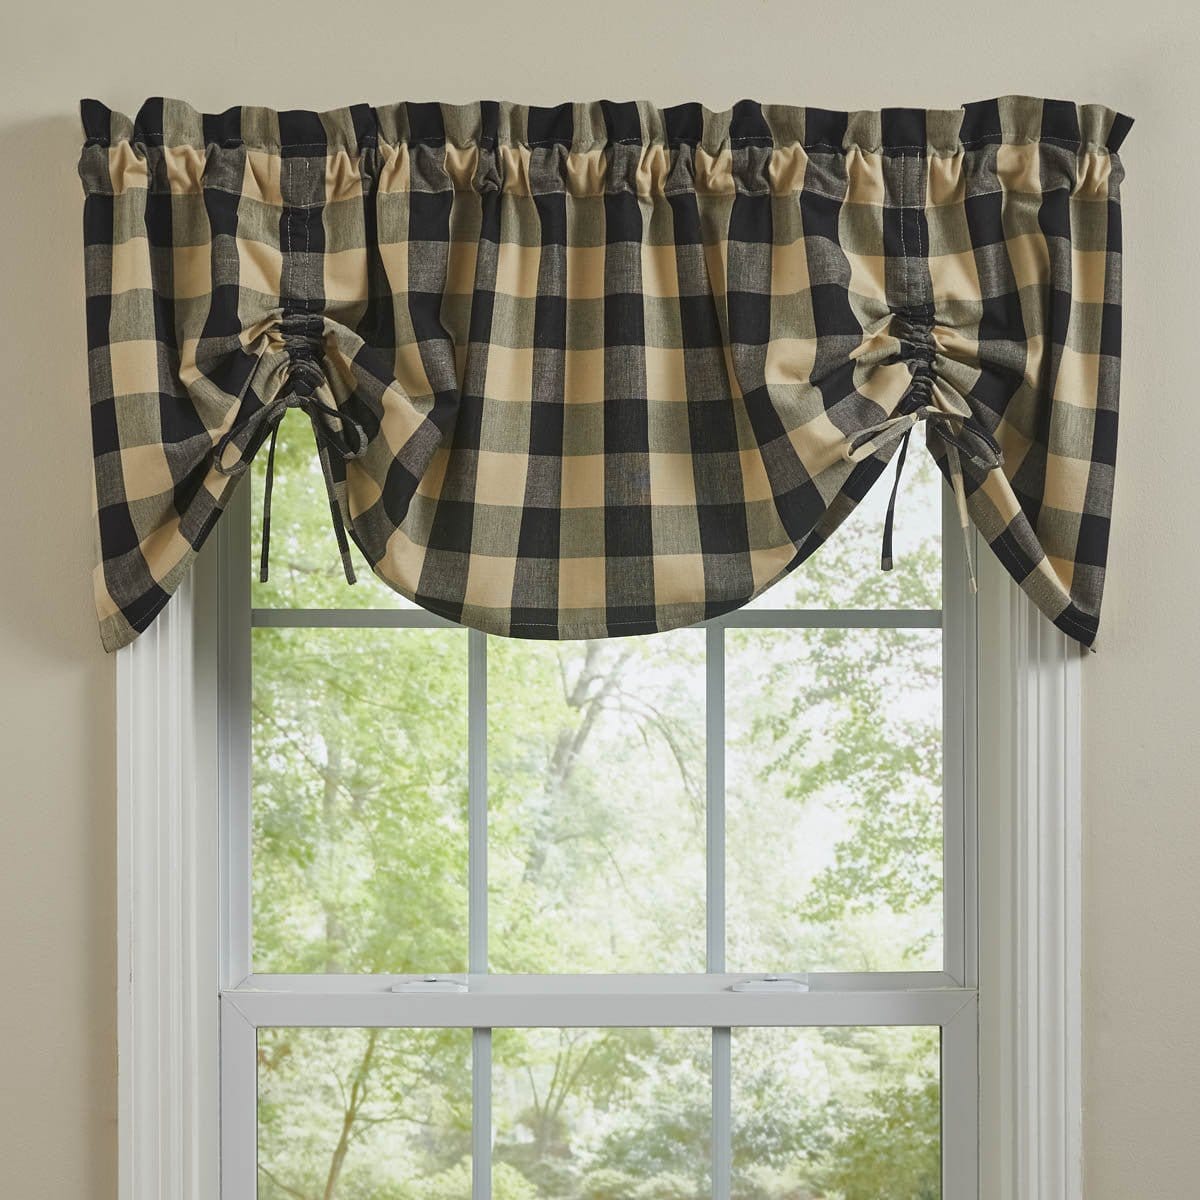 Wicklow Check in Black Tie Up Farmhouse Valance Lined-Park Designs-The Village Merchant